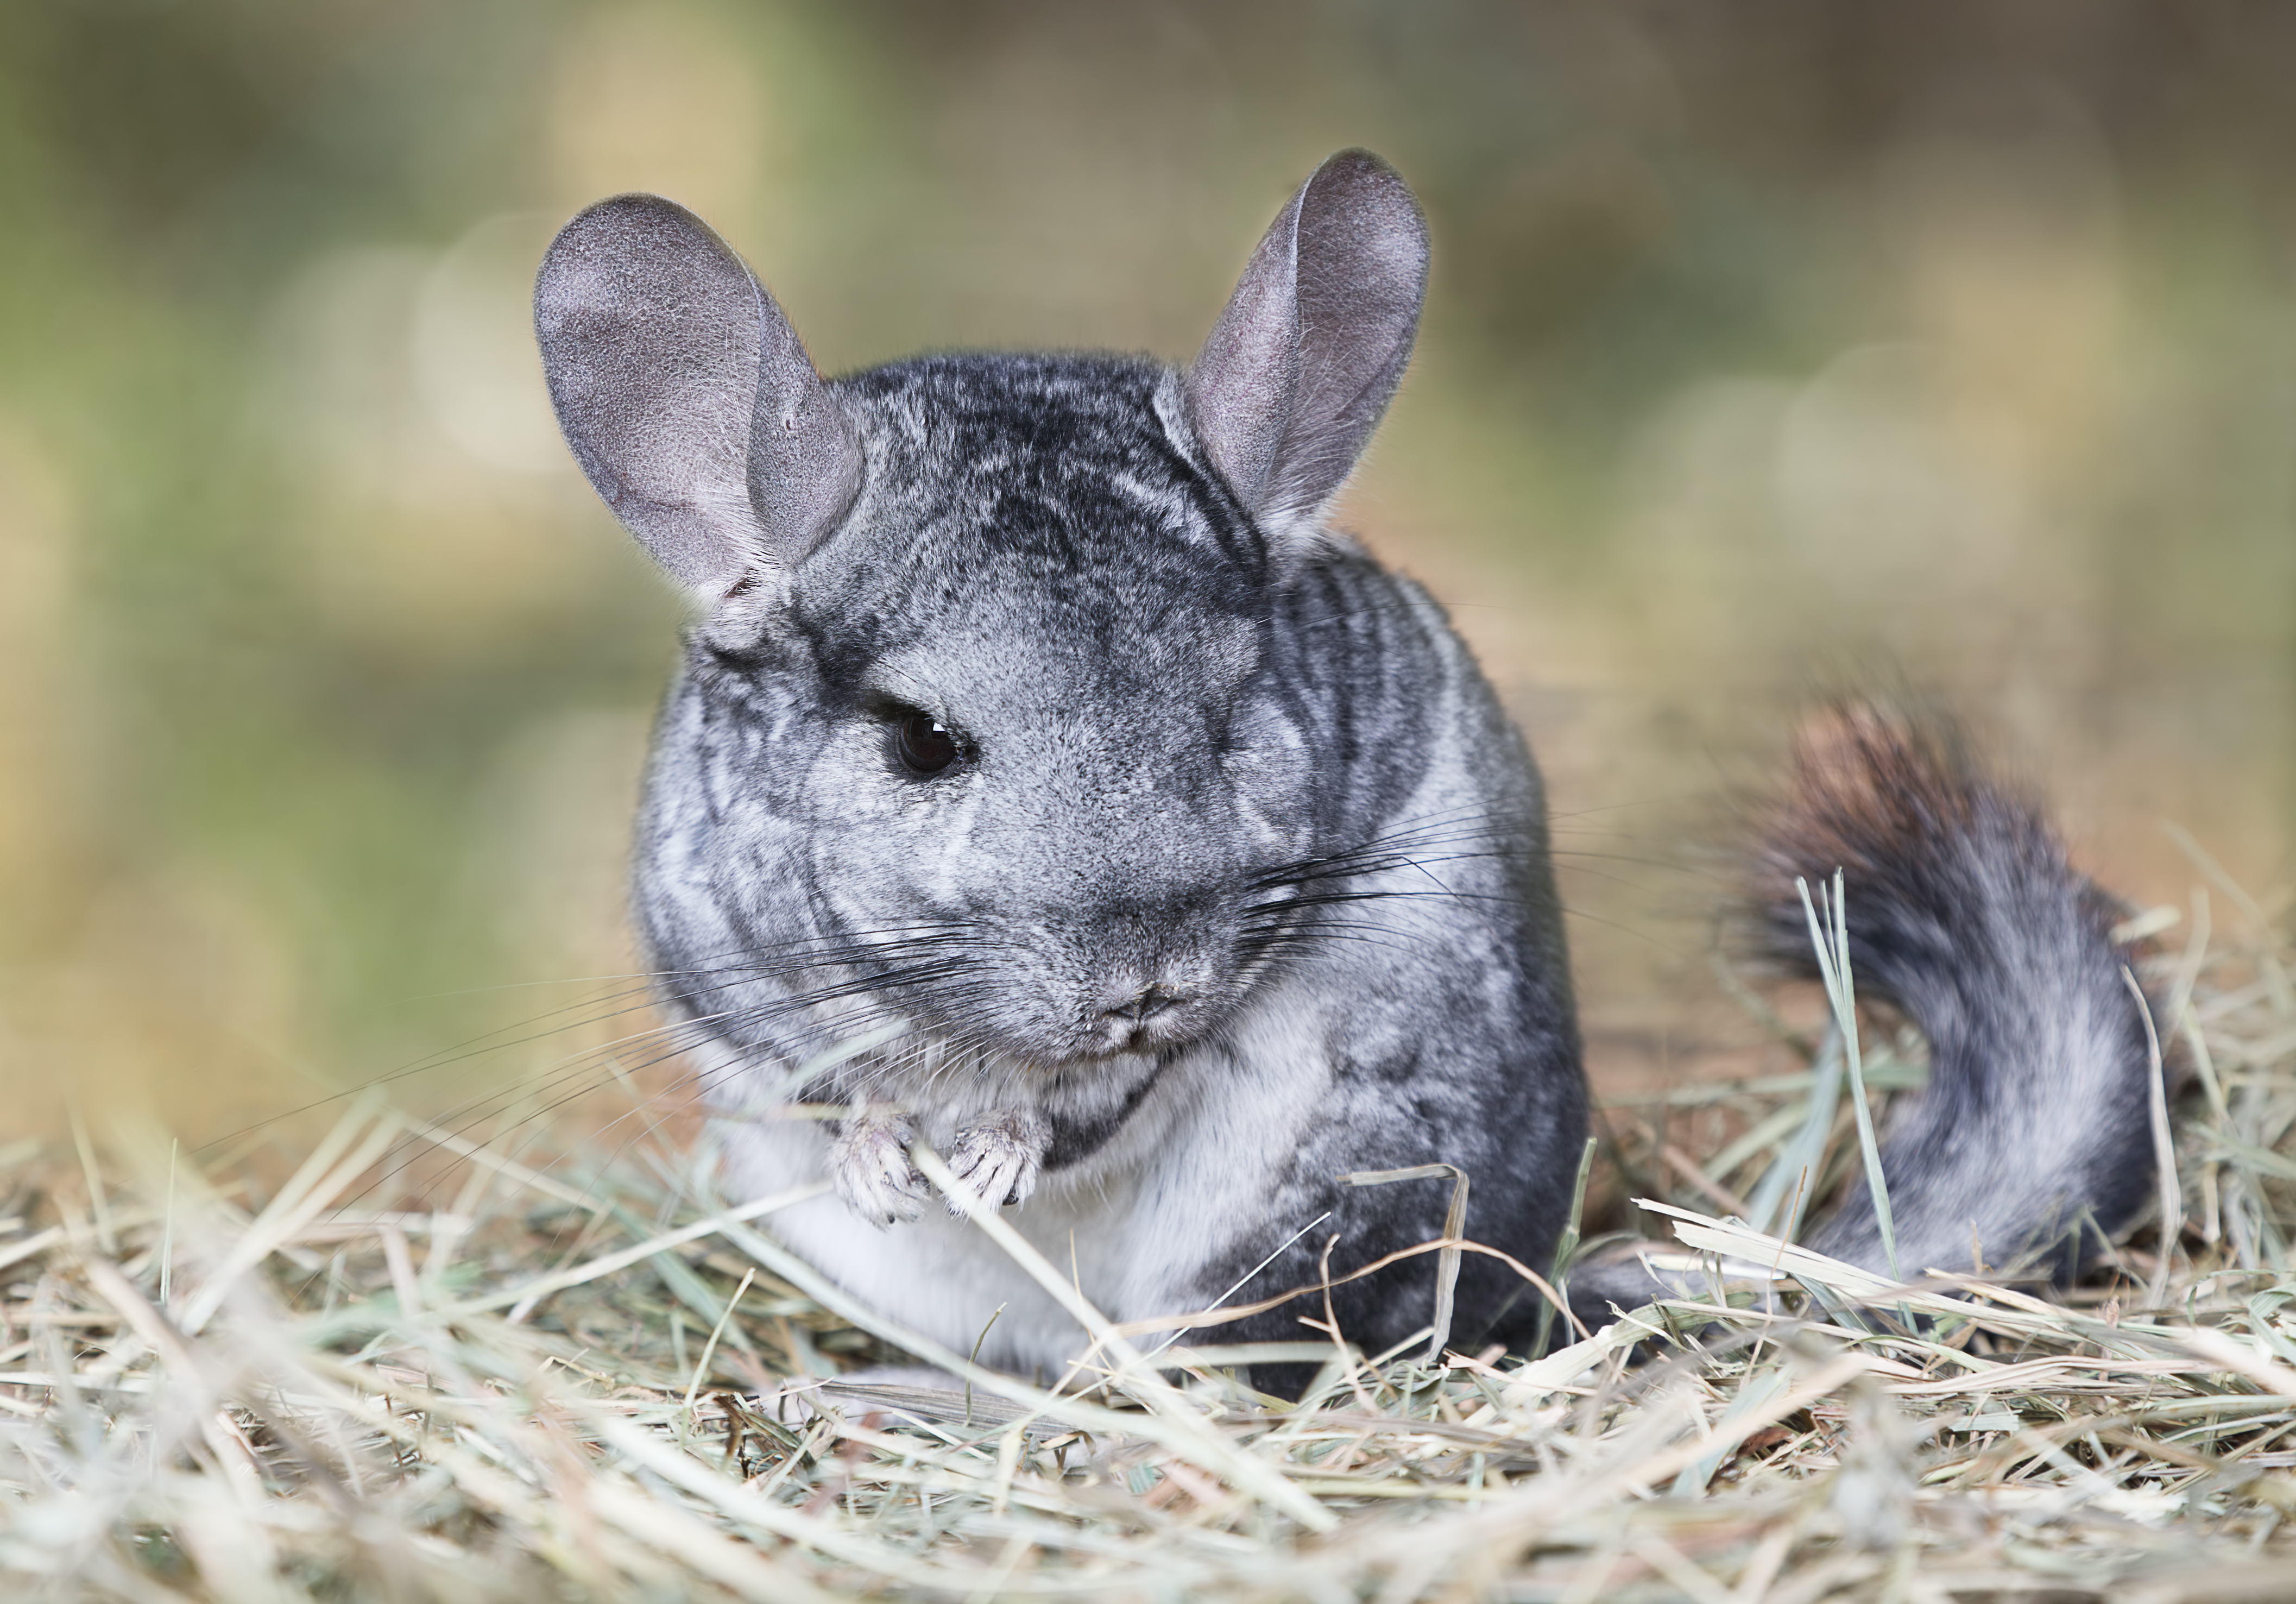 A gray mouse sits on the hay